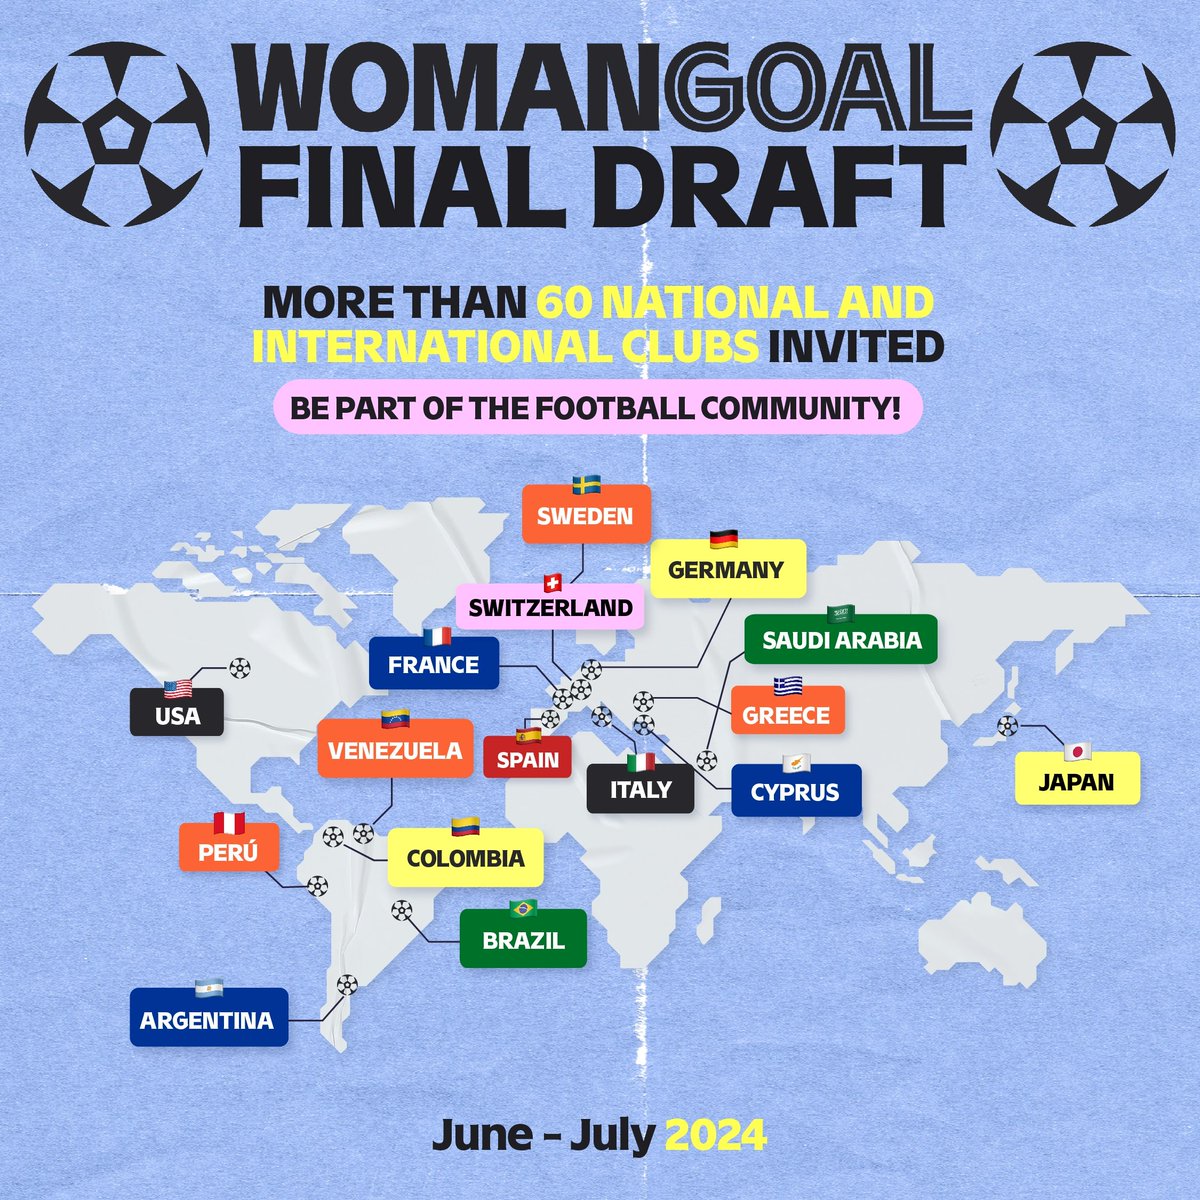 🤩The Final Draft is getting closer and closer, and it's going to be something incredible! 📲Join us for an event that brings clubs together. Connect with us on social media or email hello@womangoal.com if you are interested⁠! #WomanGoal #FinalDraft #WomensFootball